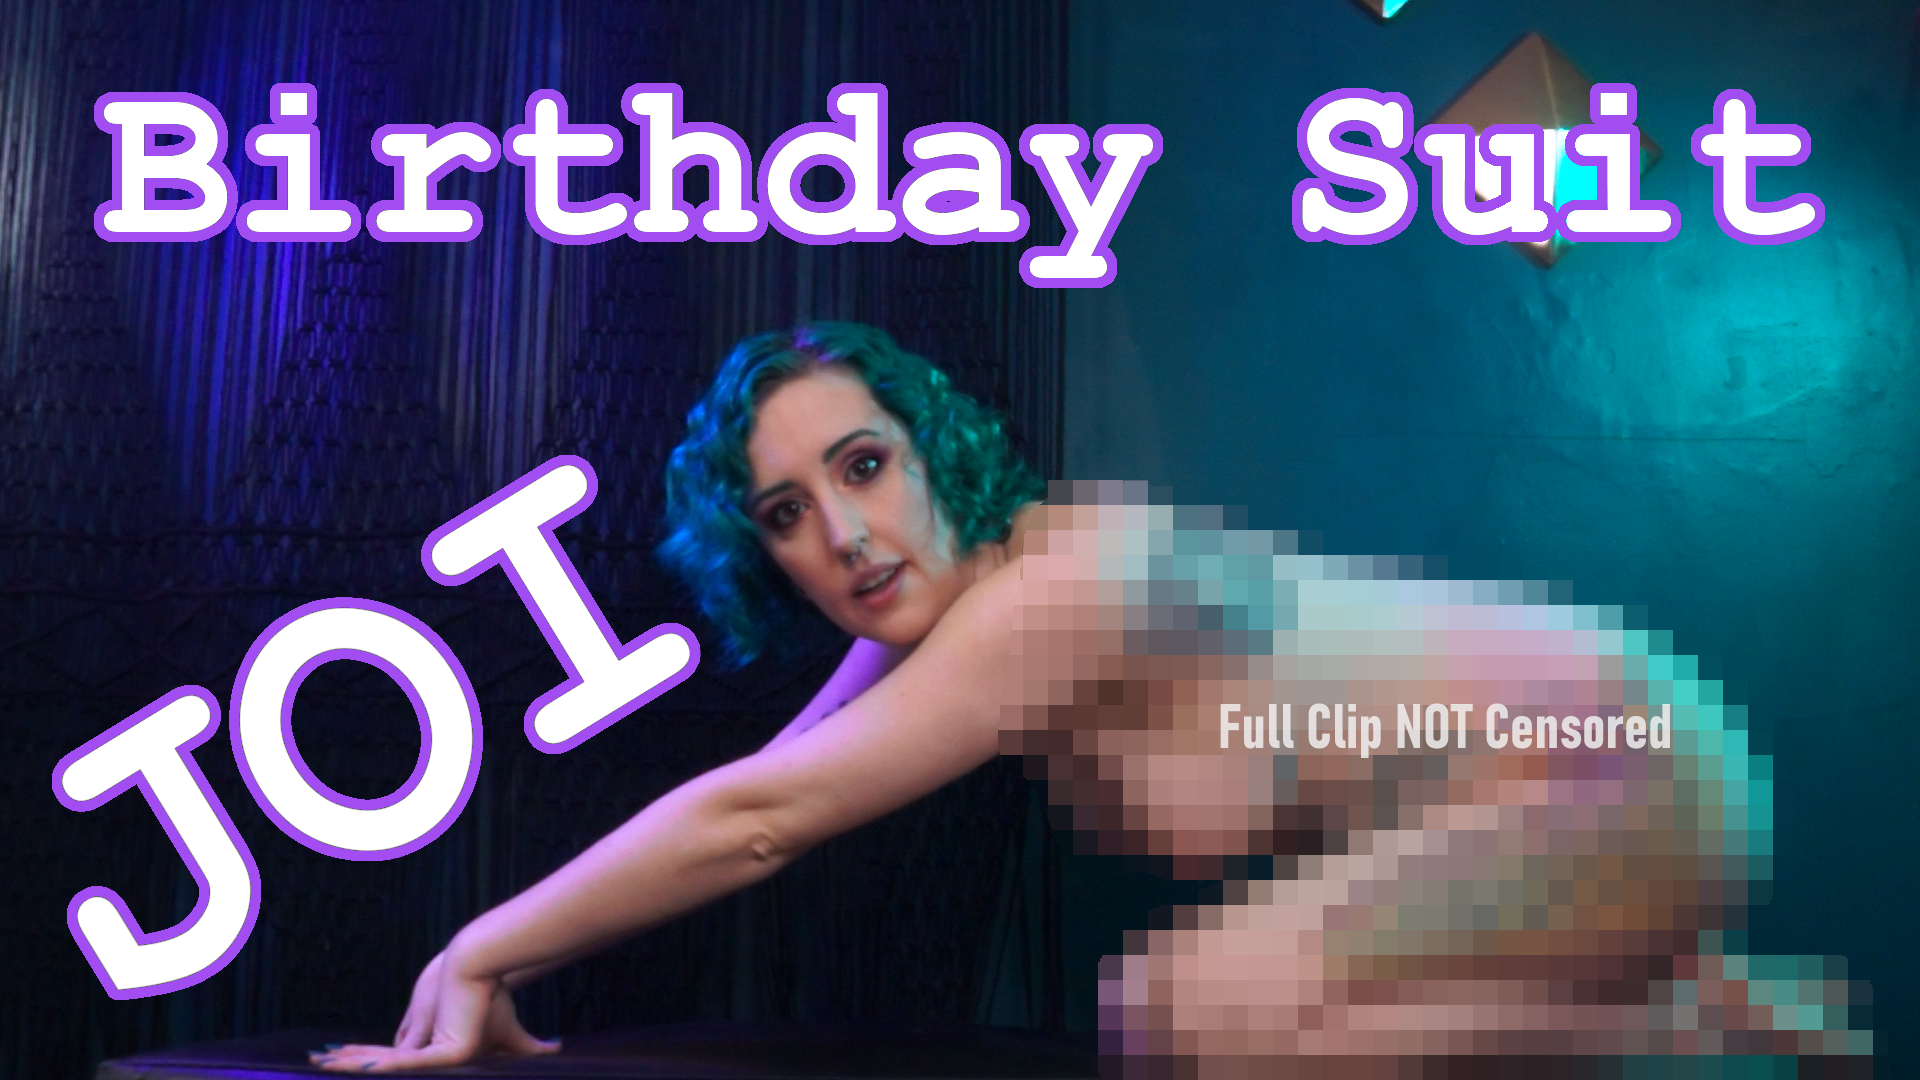 This is a snapshot from the femdom findom Jerk Off Instruction clip, Birthday Suit JOI - Uncensored. Femdom Findom Goddess Miss Faith Rae poses on her hands and knees on a bench, completely naked. Her glorious Goddess body is censored with a pixel filter. Her hair is short, curly, and turquoise. She stares into your soul, knowing you are going to tribute your entire savings account to her if that's what it takes for her to permit you to cum. Text overlay says, Birthday Suit JOI. Full Clip NOT Censored.